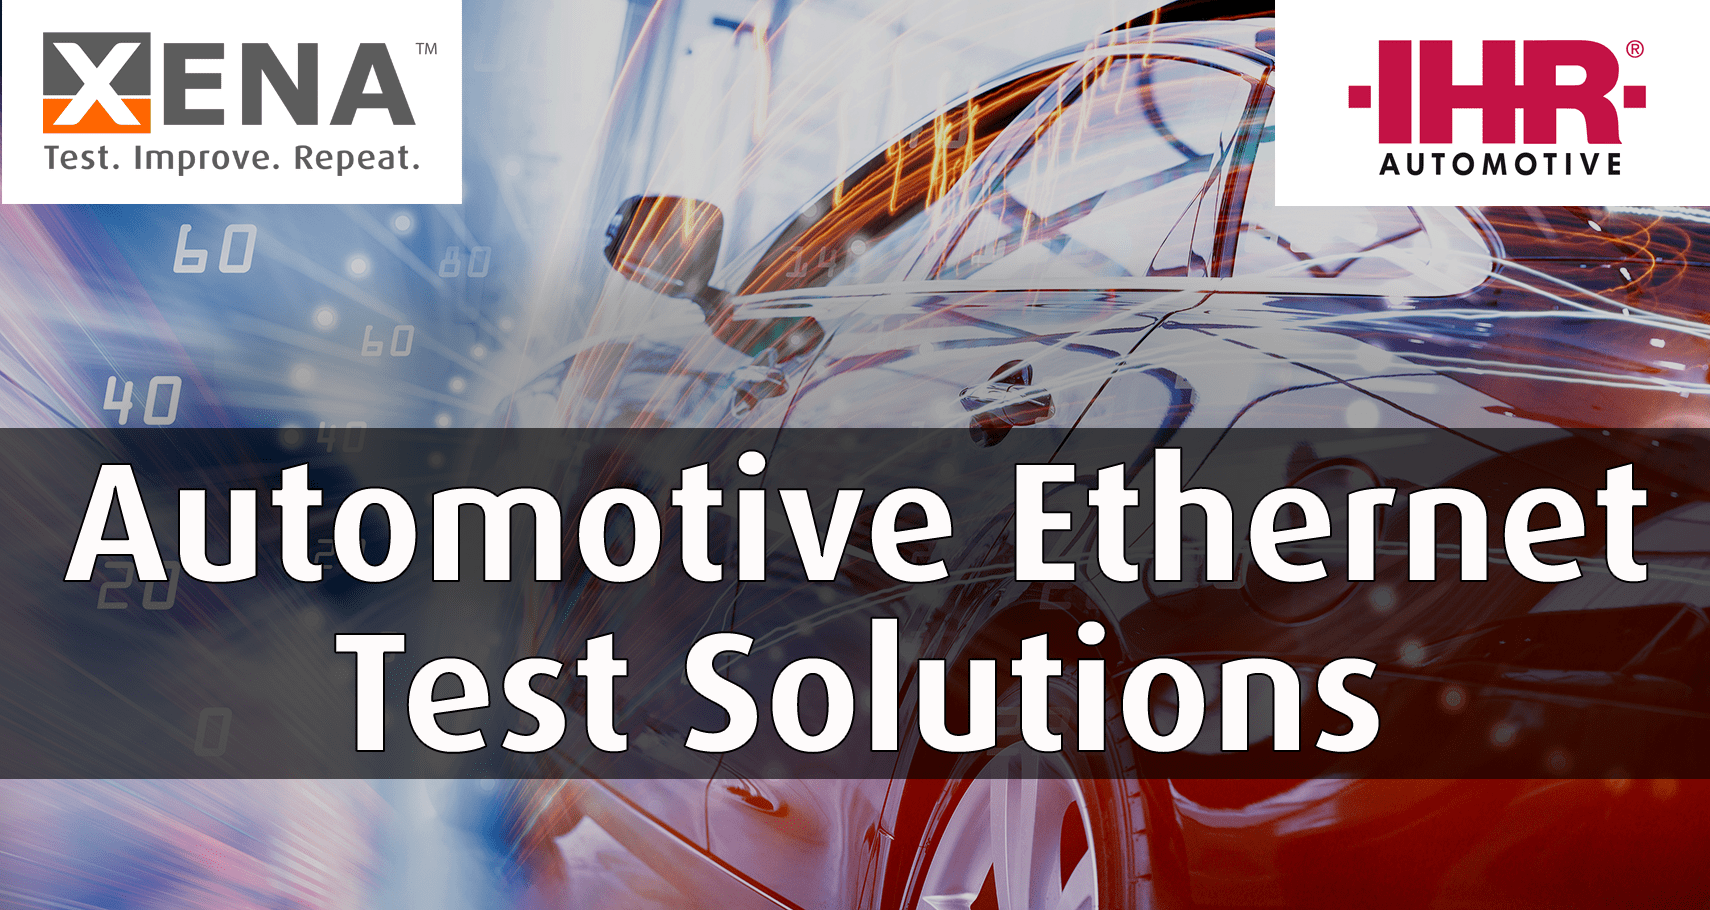 Xena appoints ihr Automotive as European Distributor for Automotive Ethernet Test Solutions